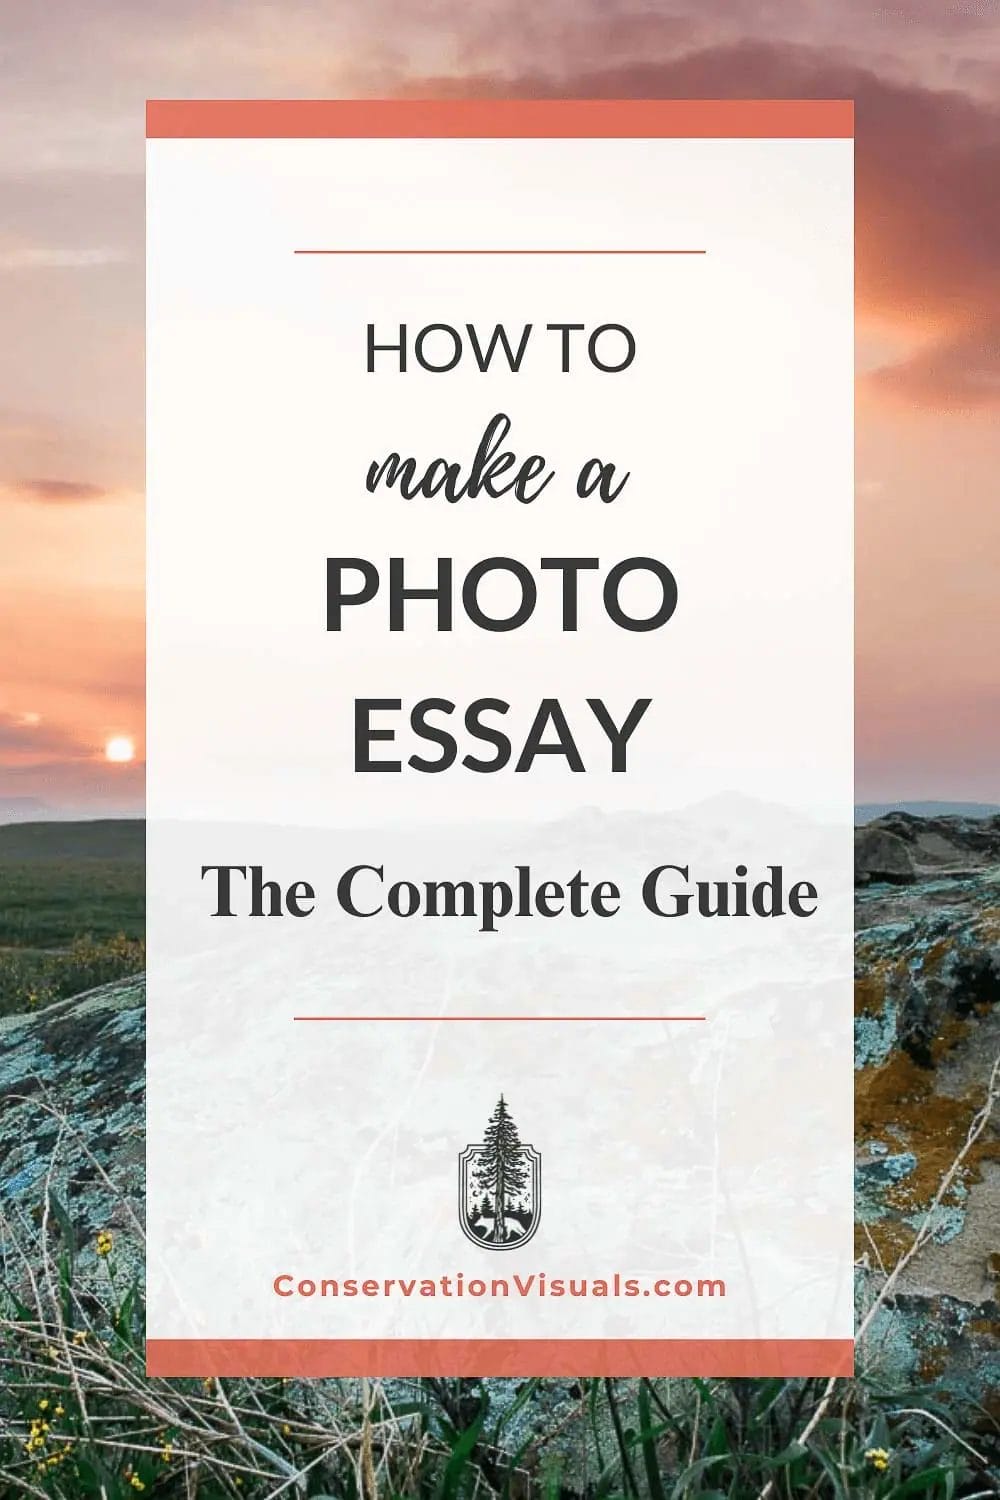 examples of photo essay images